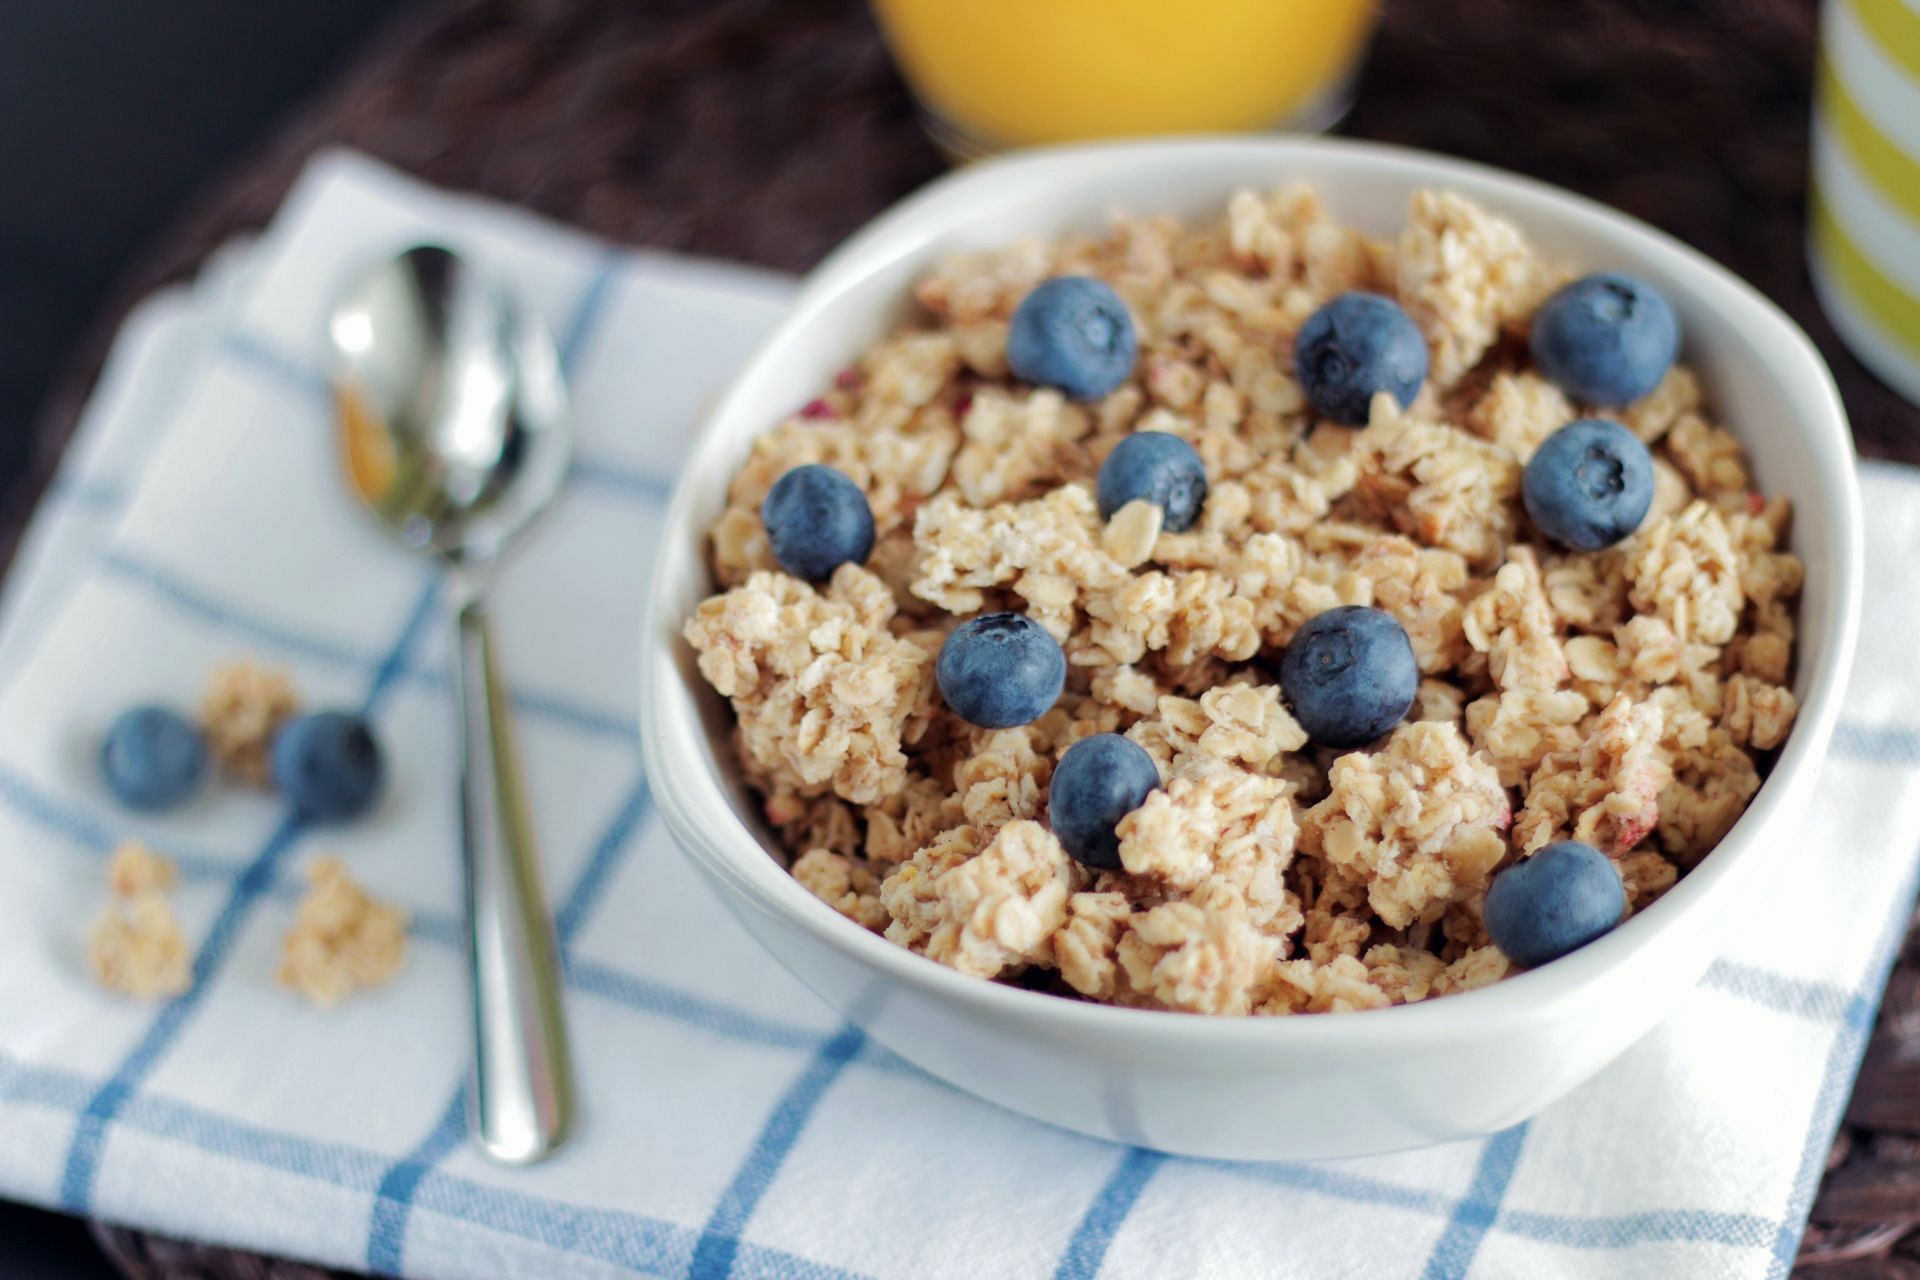 healthy foods to eat everyday (image sourced via Pexels / Photo by jeshoots)